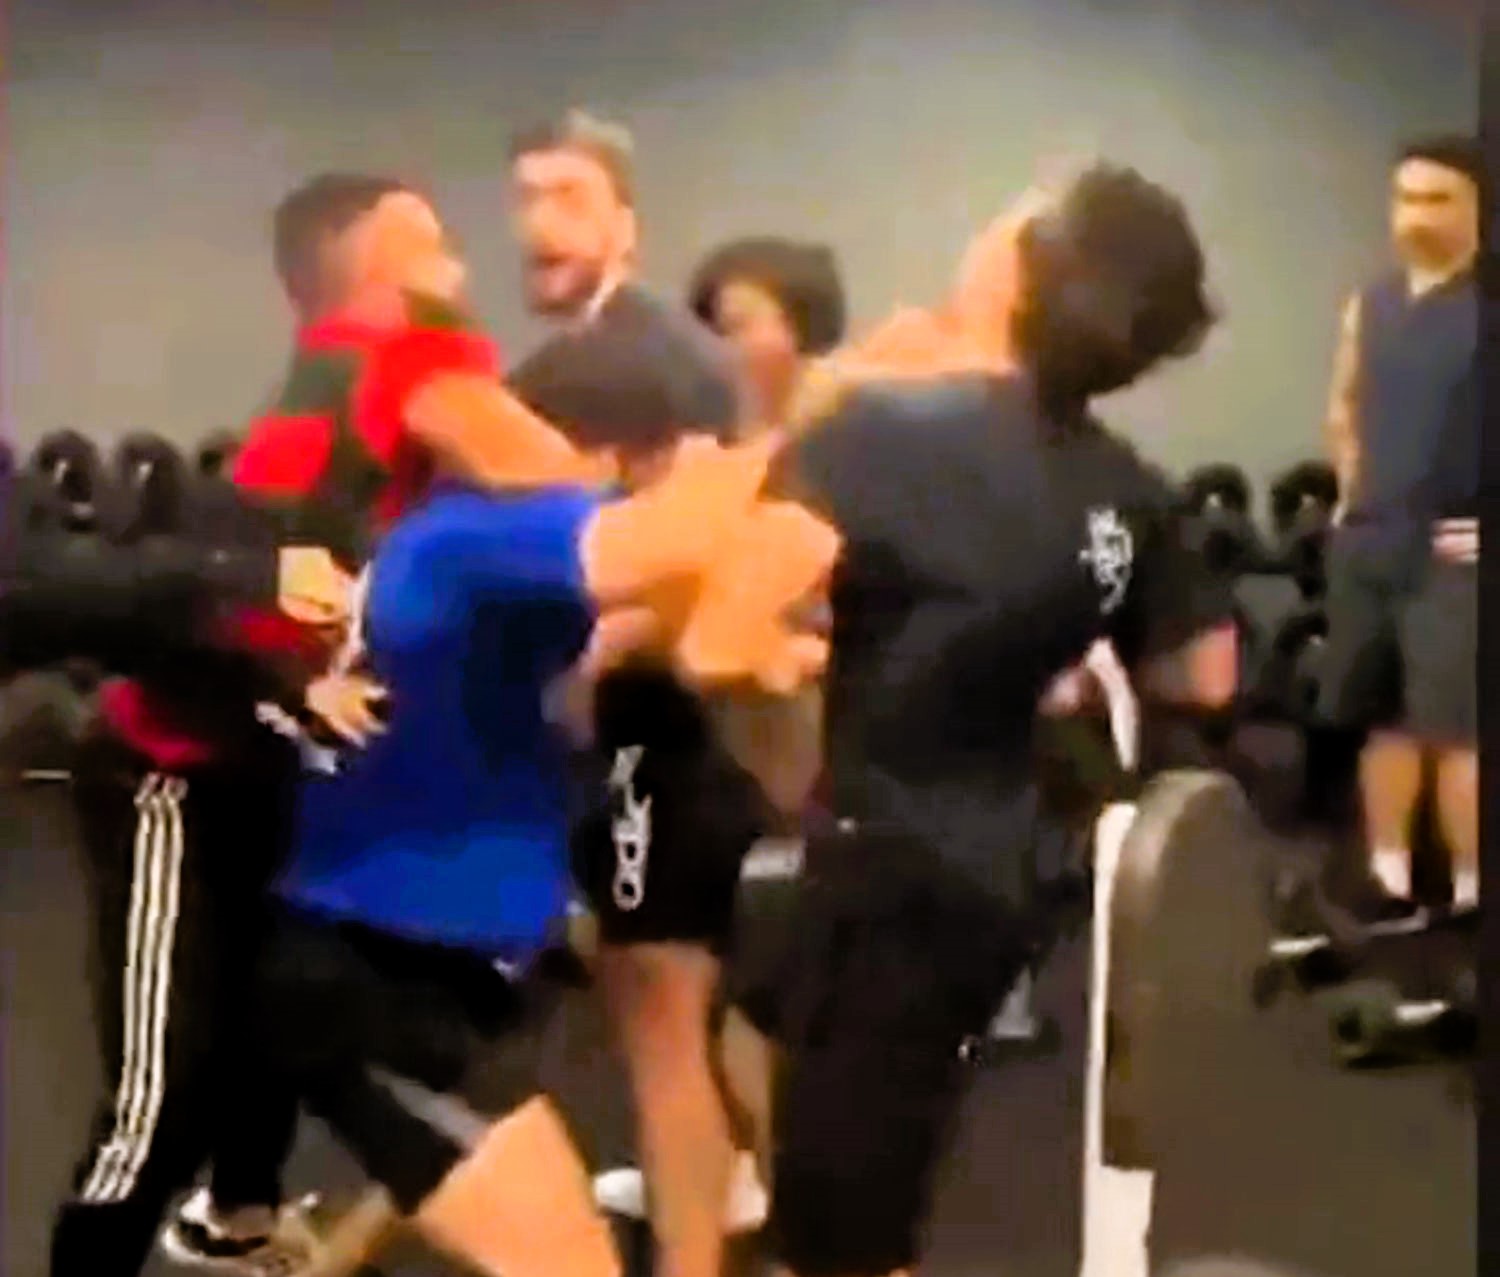 Mass brawl erupts at gym after weightlifter mocks fellow member, leading to a chaotic fistfight in Belo Horizonte. Both men barred indefinitely. No equipment damage.